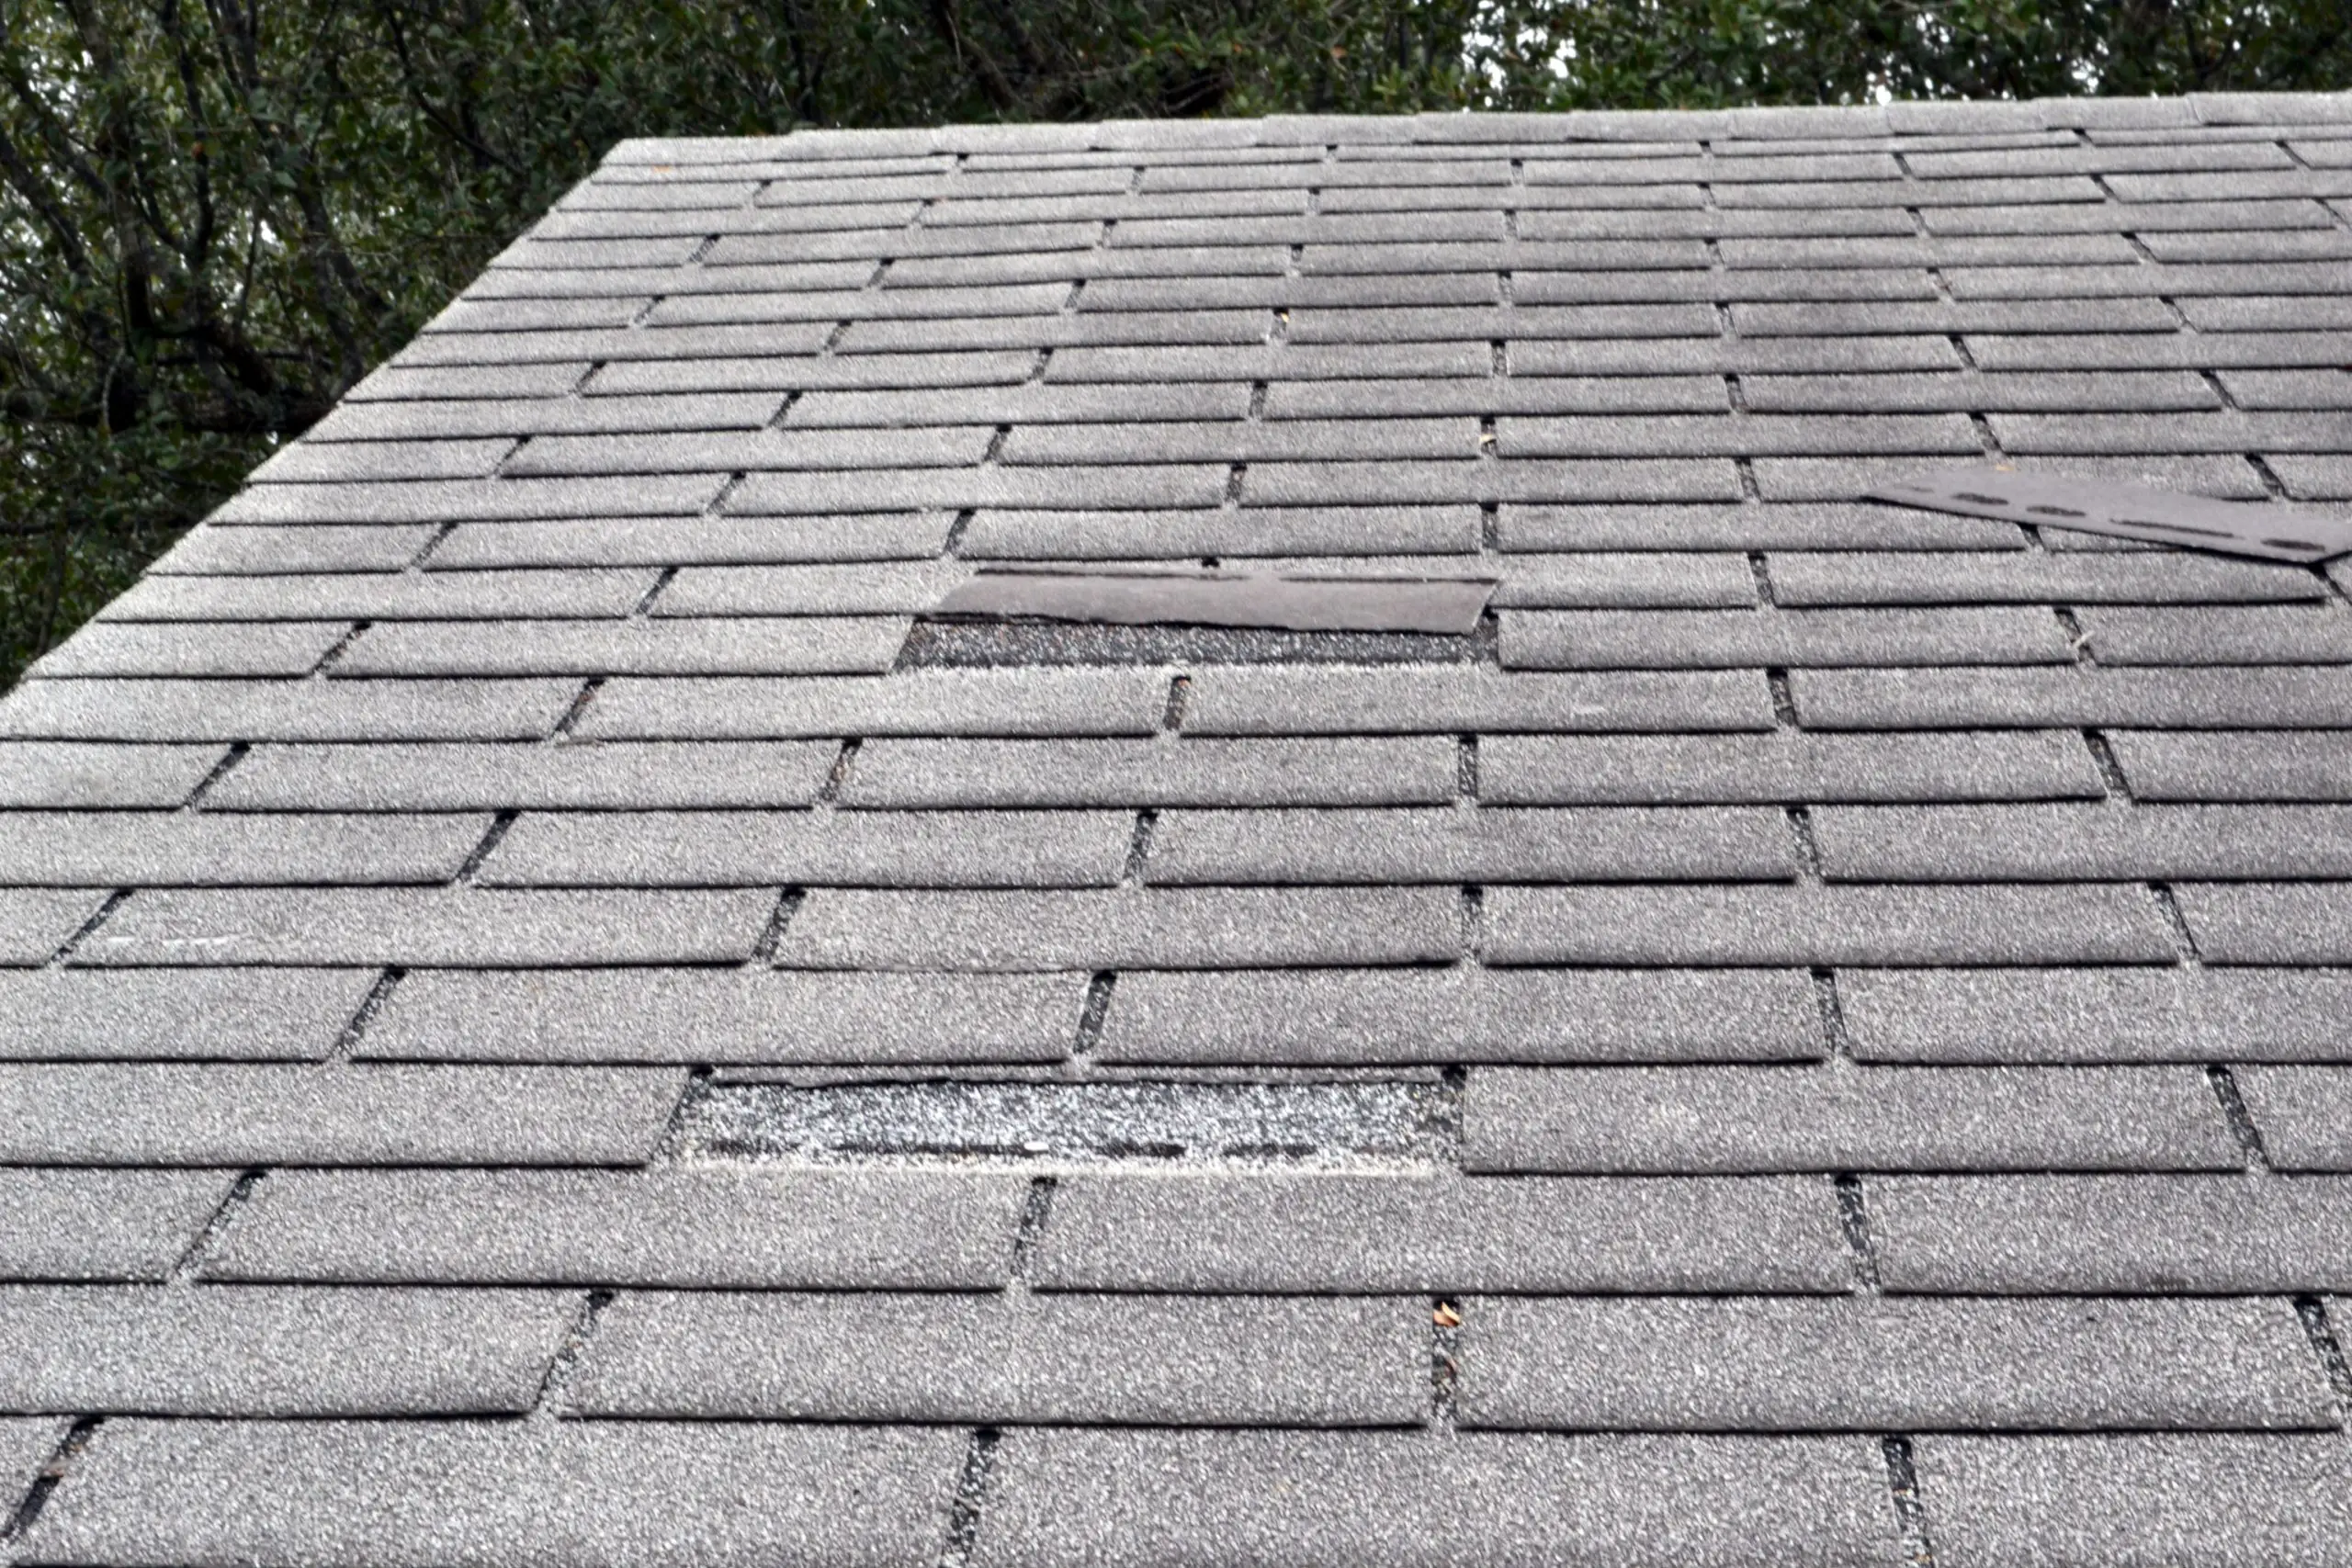 How to Detect Roof Hail Damage